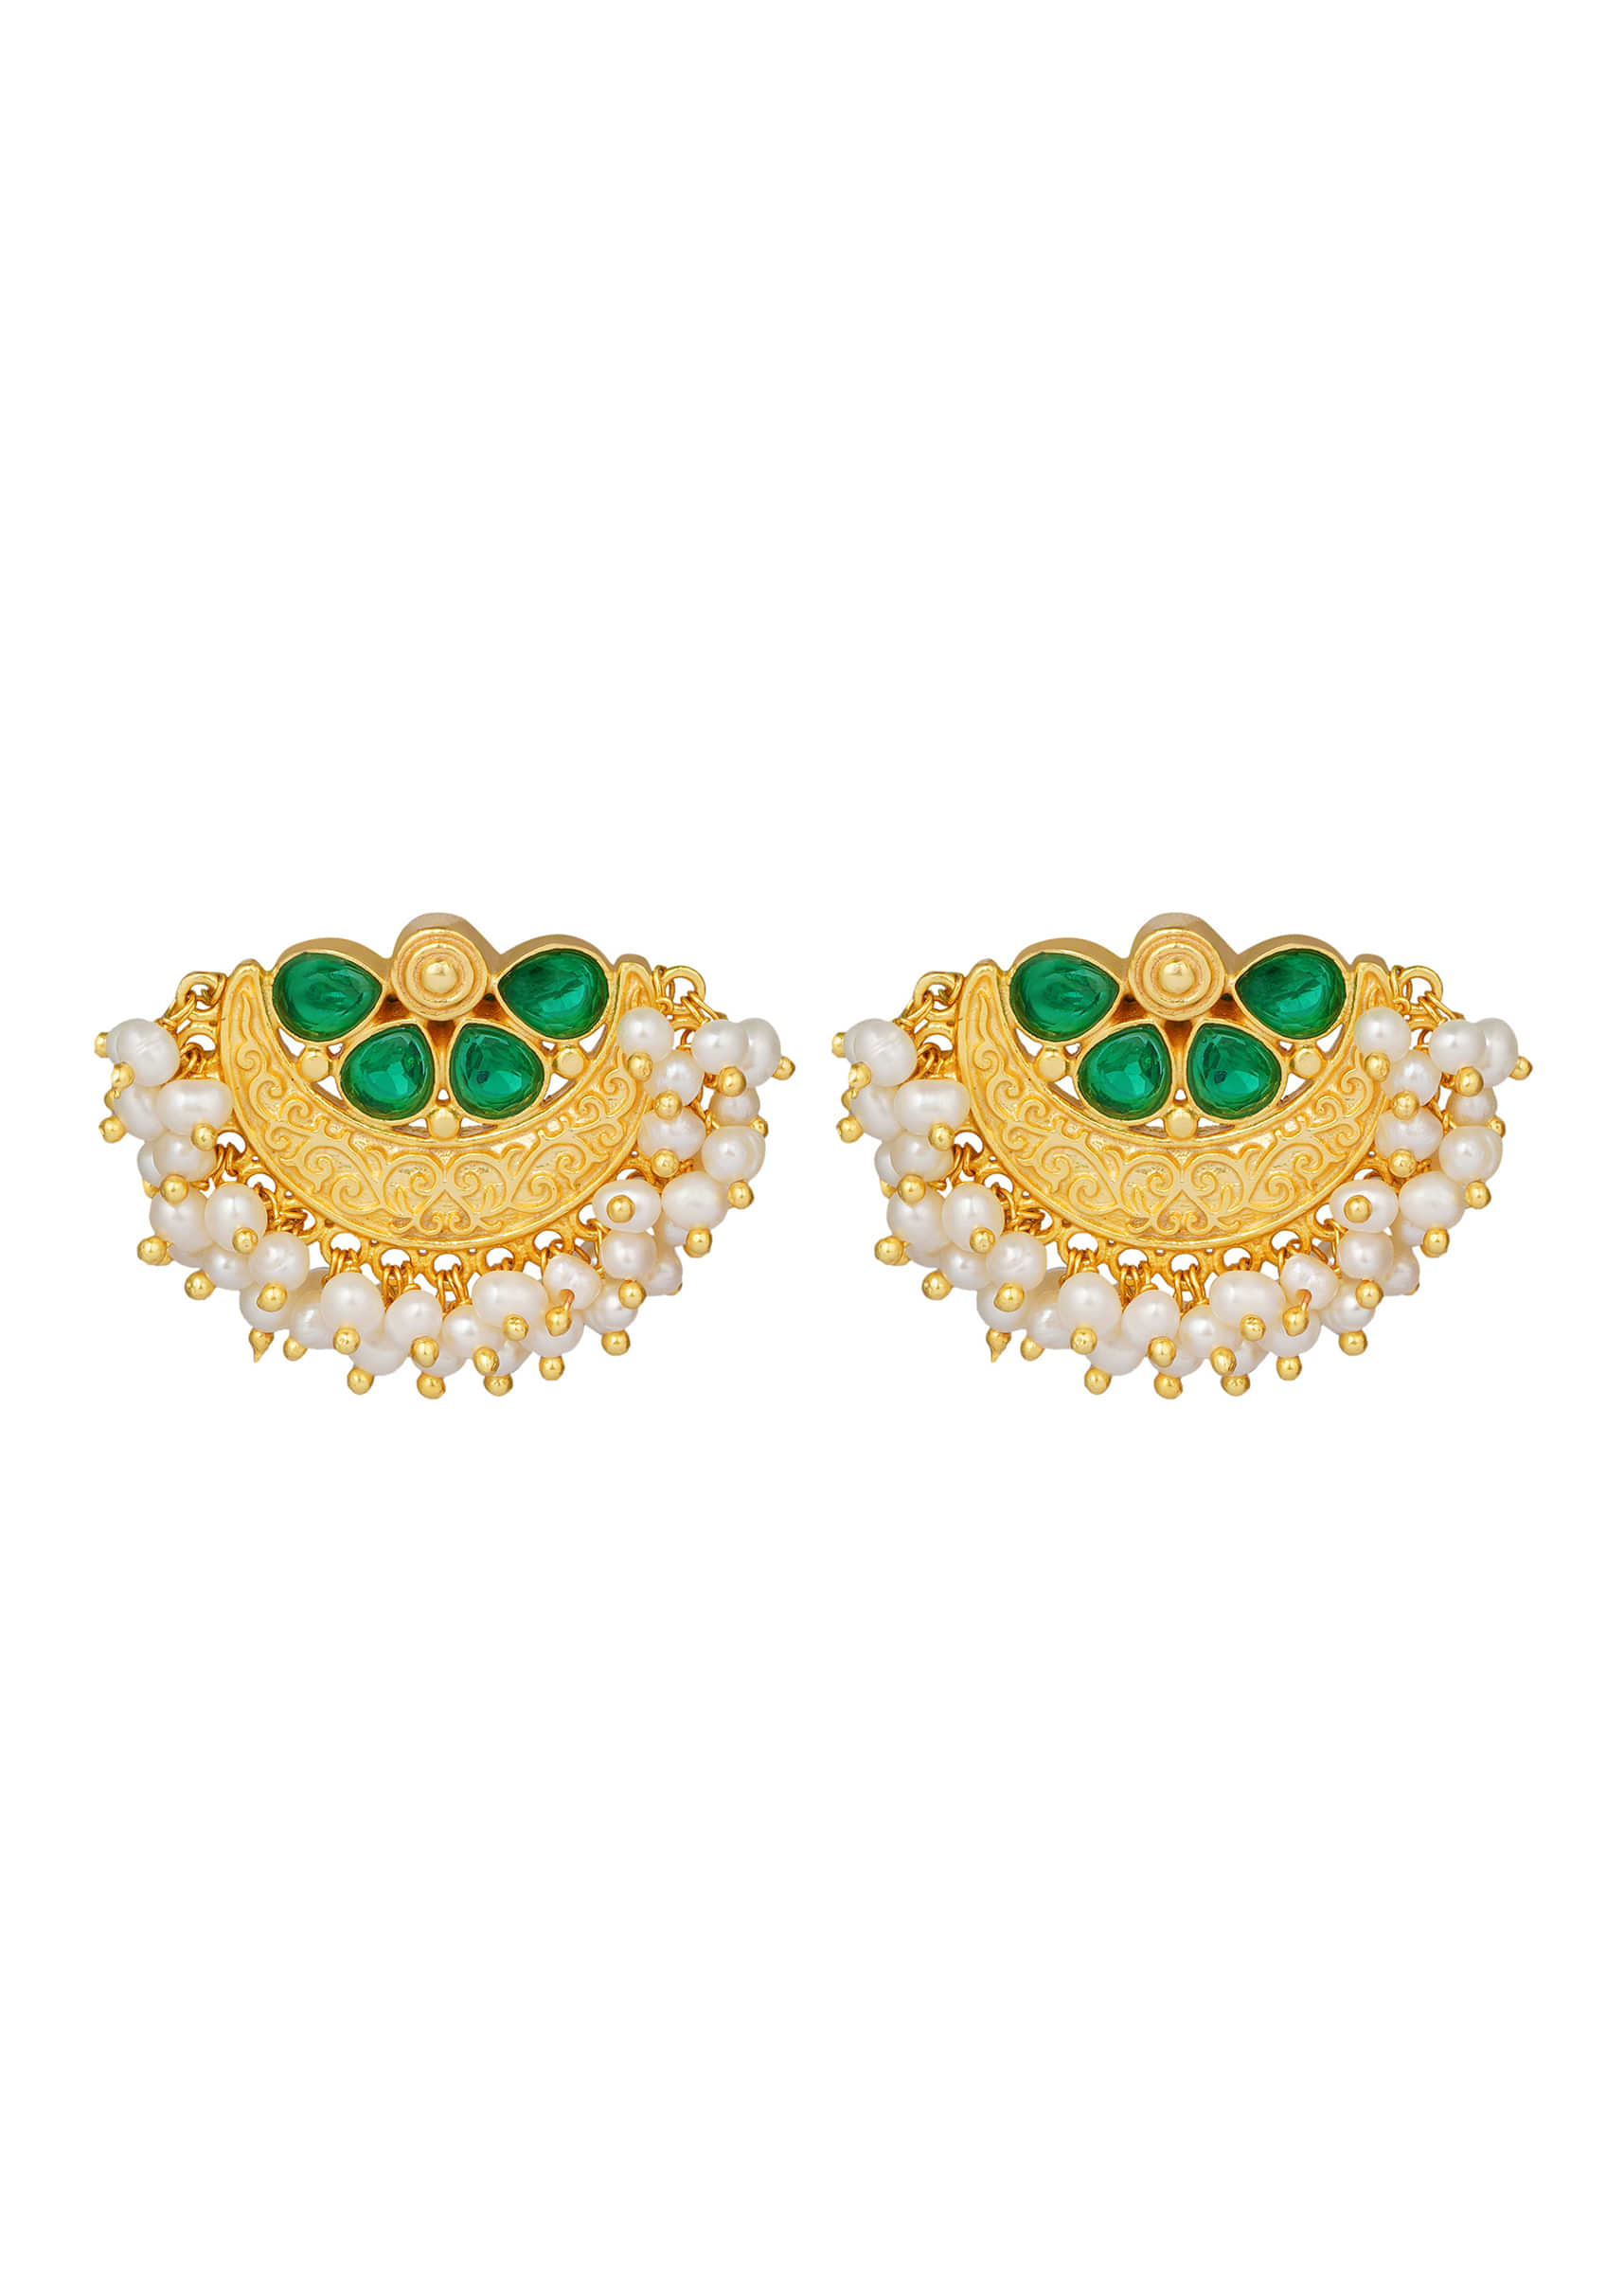 Gold Plated Floral Studs With Green Cz And Miniature Pearls By Zariin